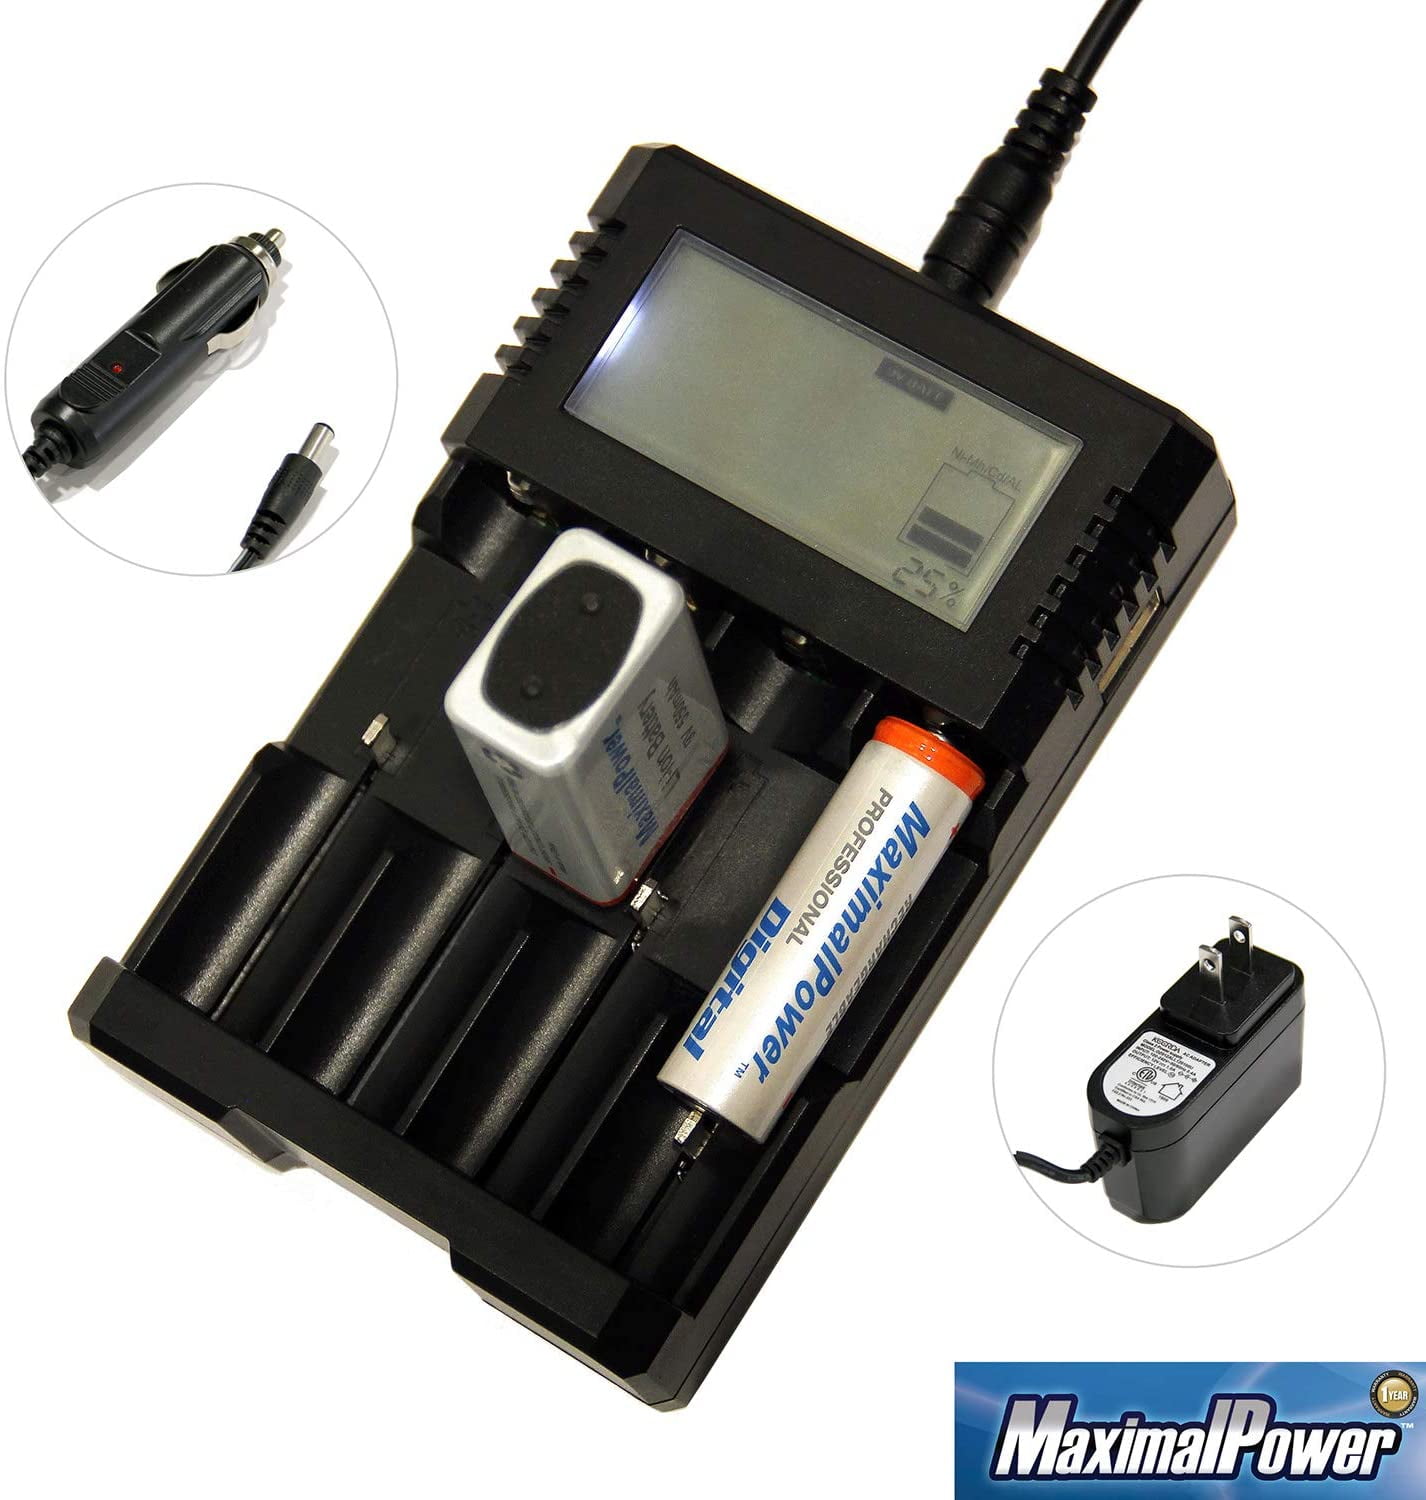 All-in-1 Universal Battery Charger for 1.2V 3.6V 9V Ni-Mh Ni-Cd Lithium Battery 